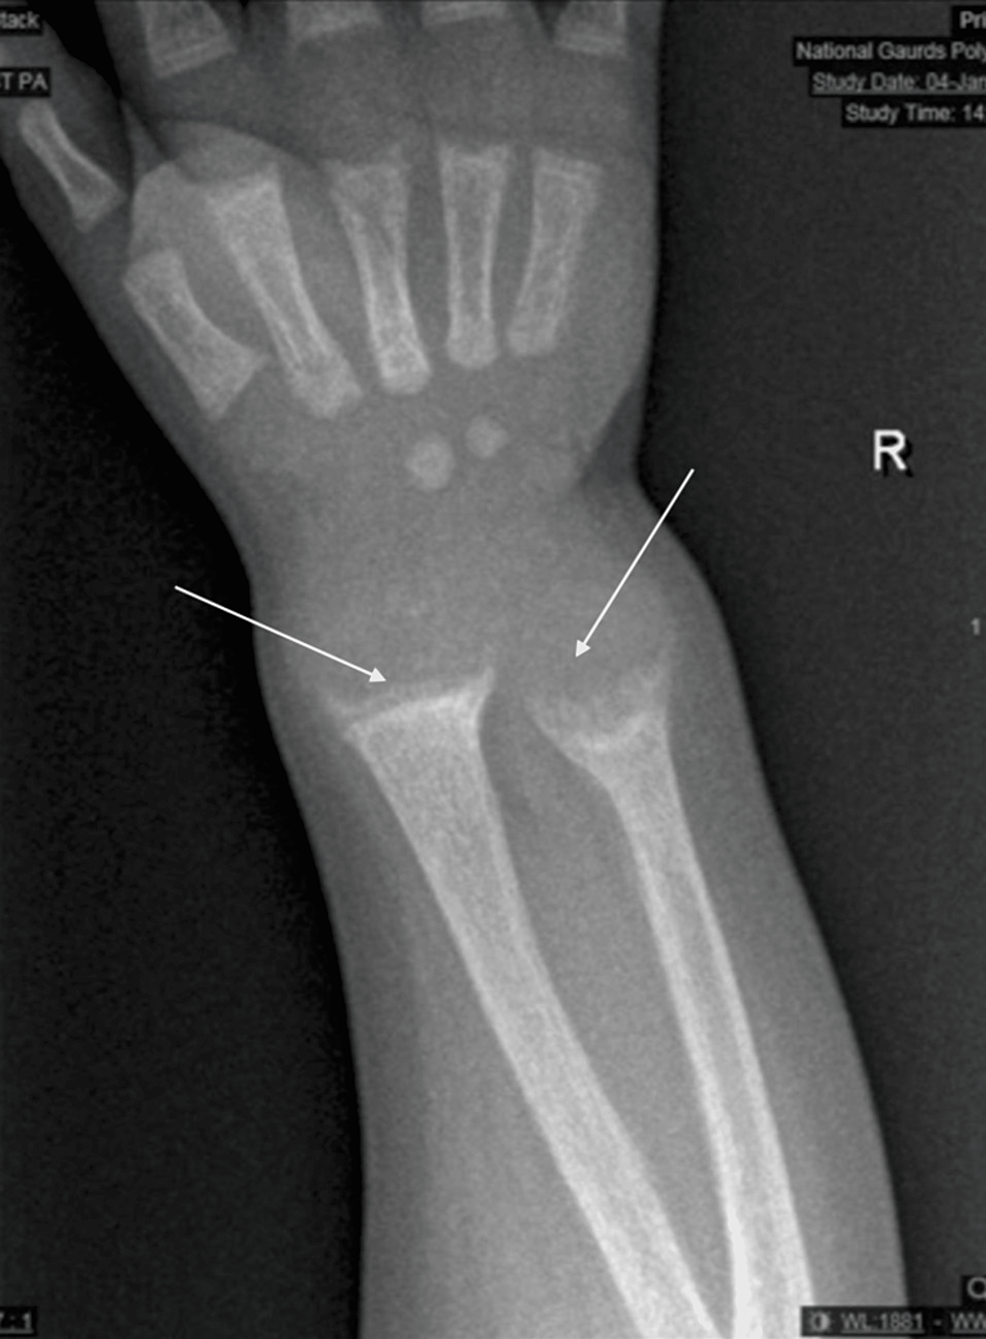 X-ray-of-the-wrist-showing-fraying,-widening,-and-cupping-of-the-metaphyseal-ends-of-both-the-ulna-and-radius-bones.